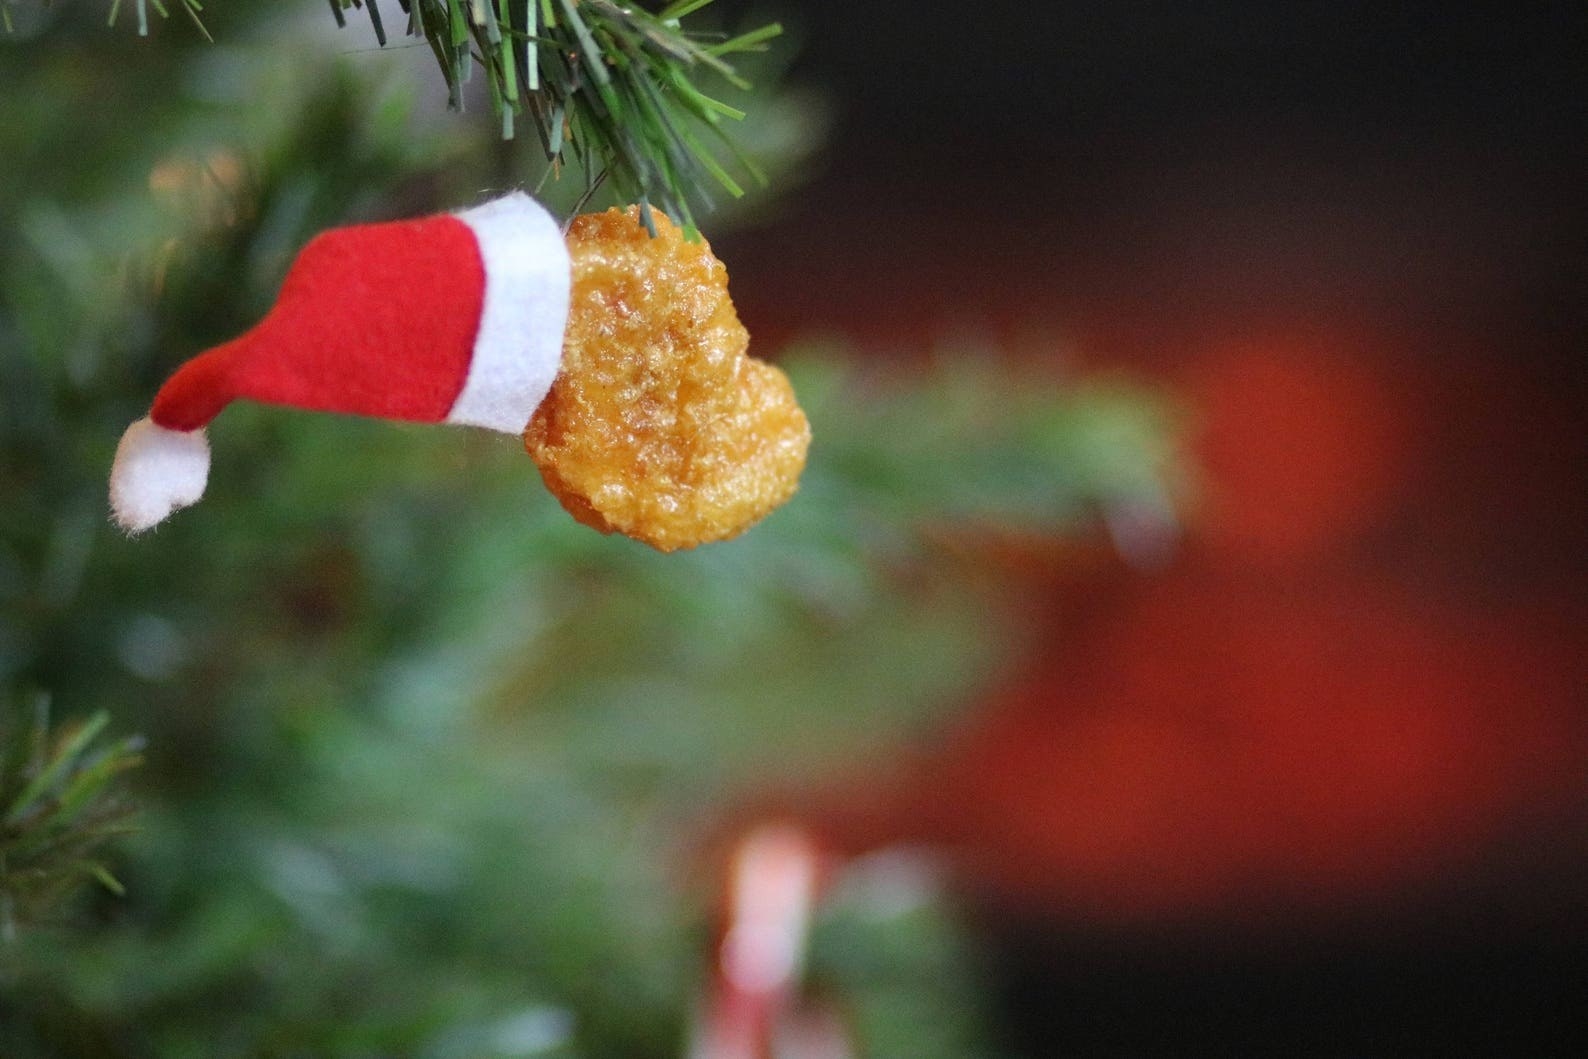 The Santa hat chicken nugget ornament hanging on a tree